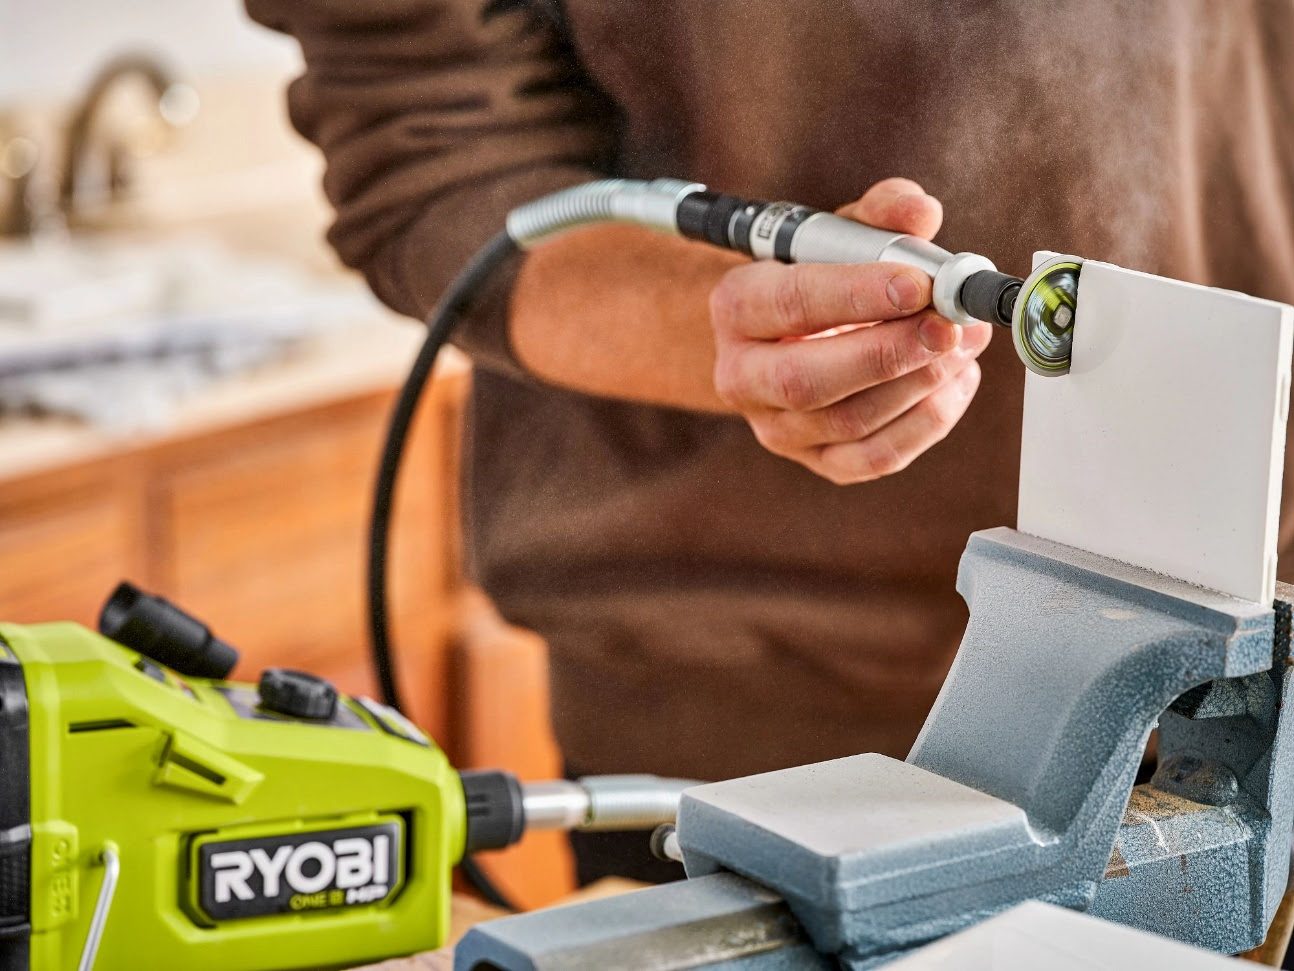 >RYOBI introduces over 60 new hobby craft & maker accessory solutions